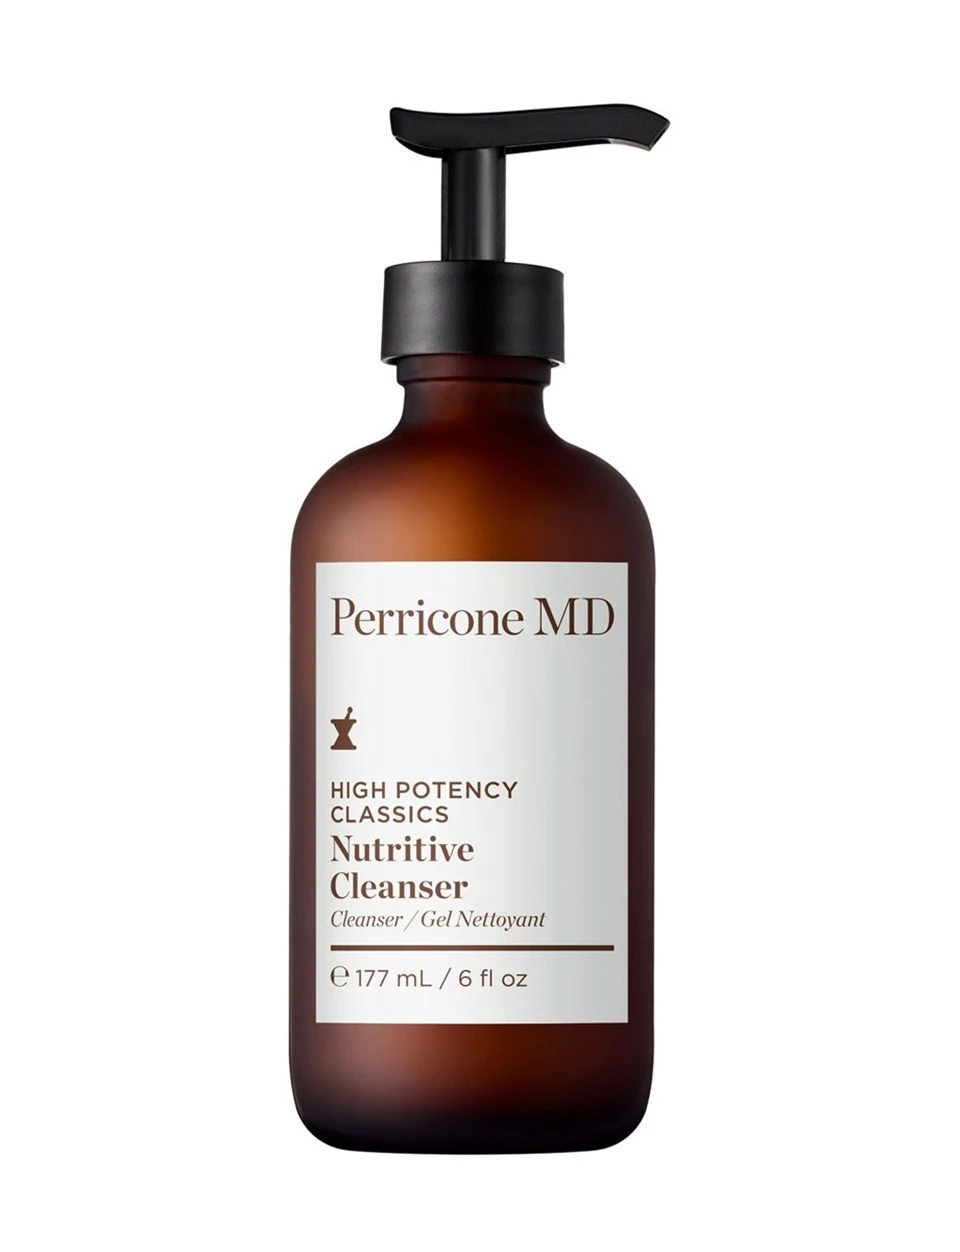 Perricone MD Nutritive Cleanser 177ml